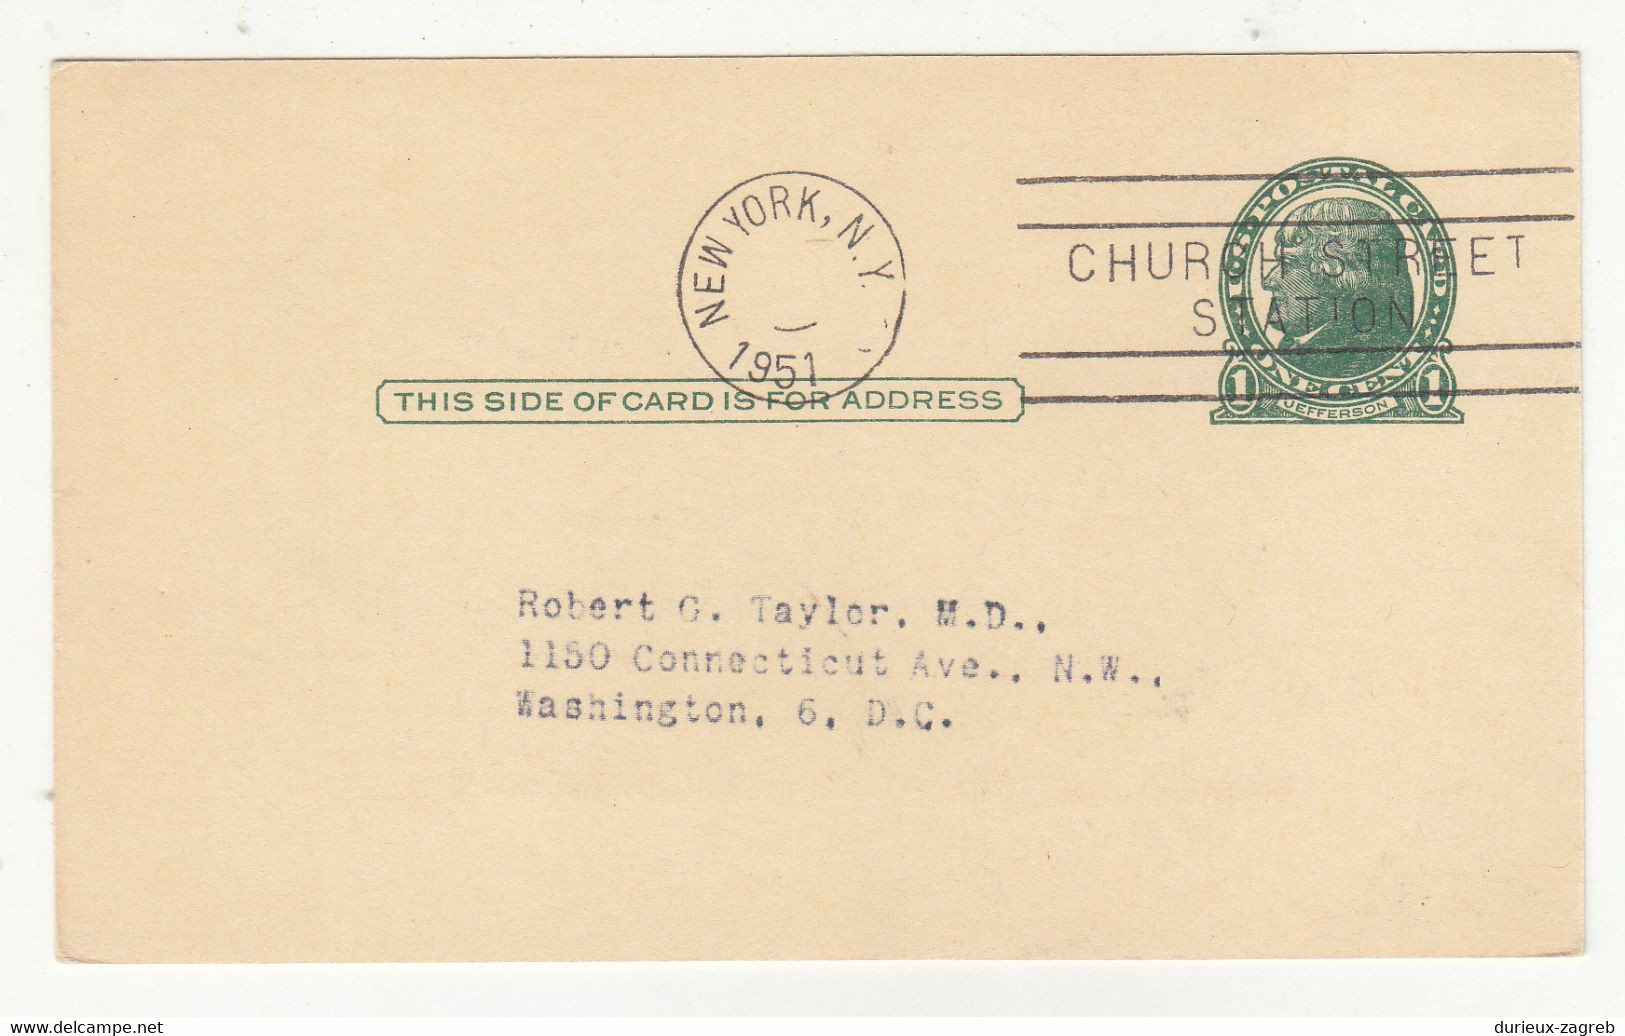 Syntrogel - Roche Illustrated Company Preprinted Postal Stationery Postcard Posted 1951 B230820 - 1941-60